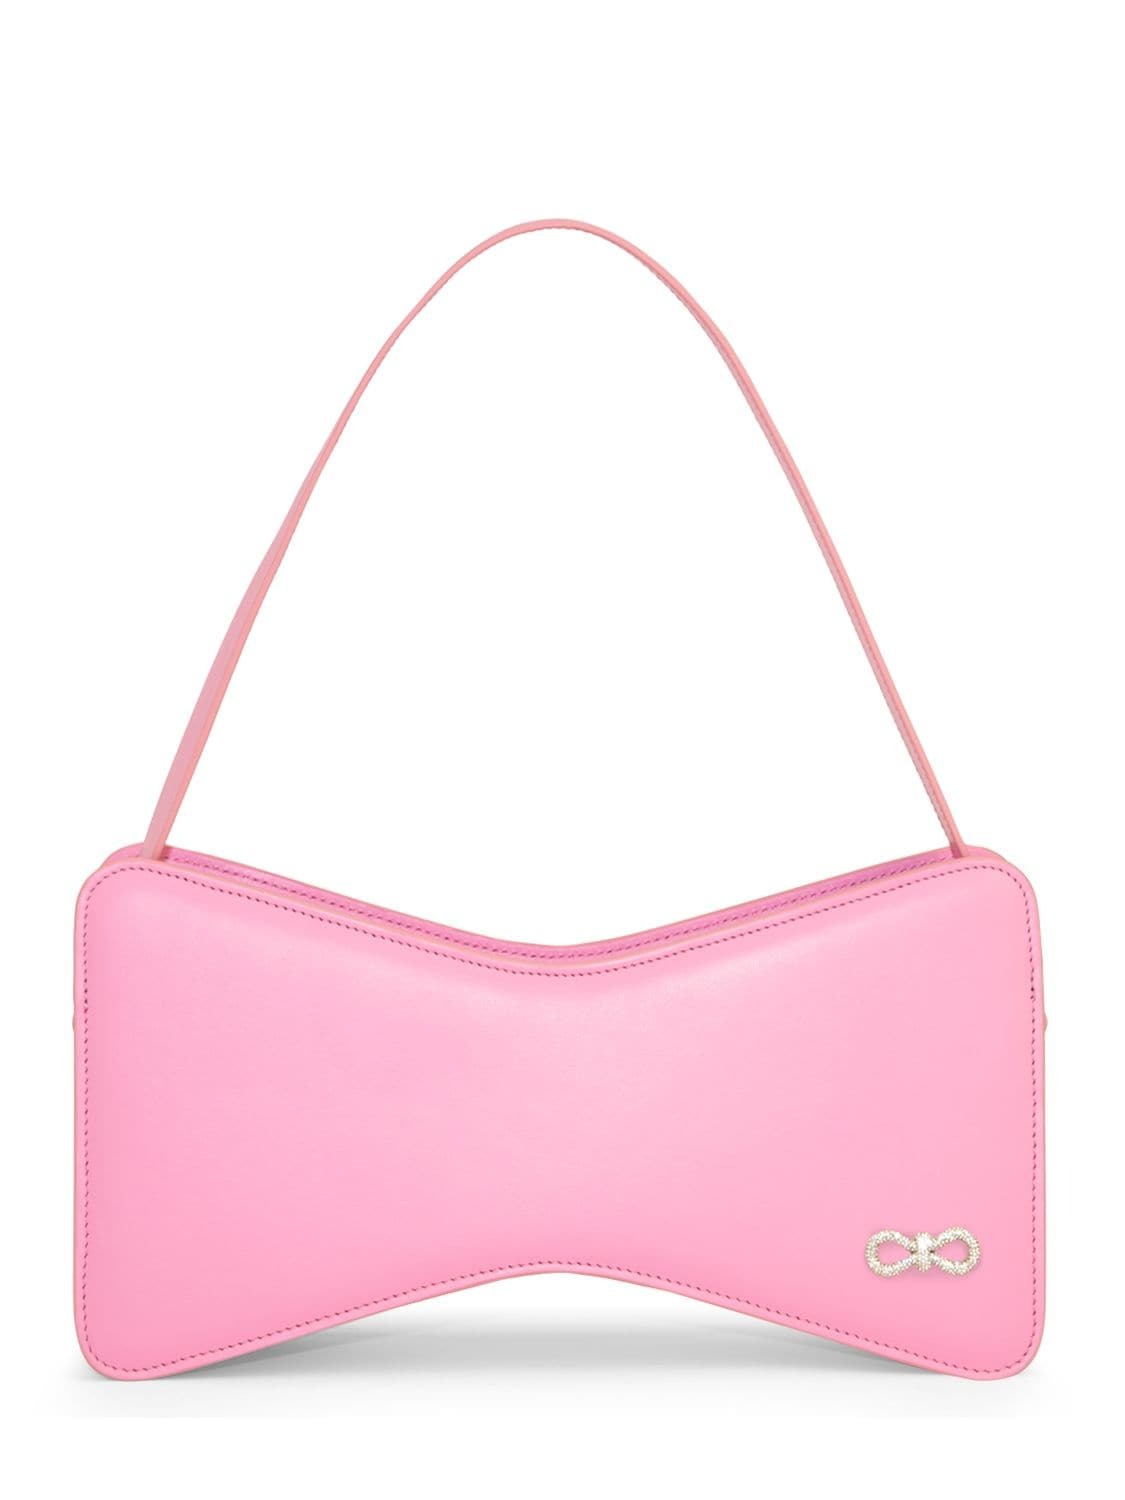 MACH & MACH Lg Bow Leather Baguette Top Handle Bag in pink